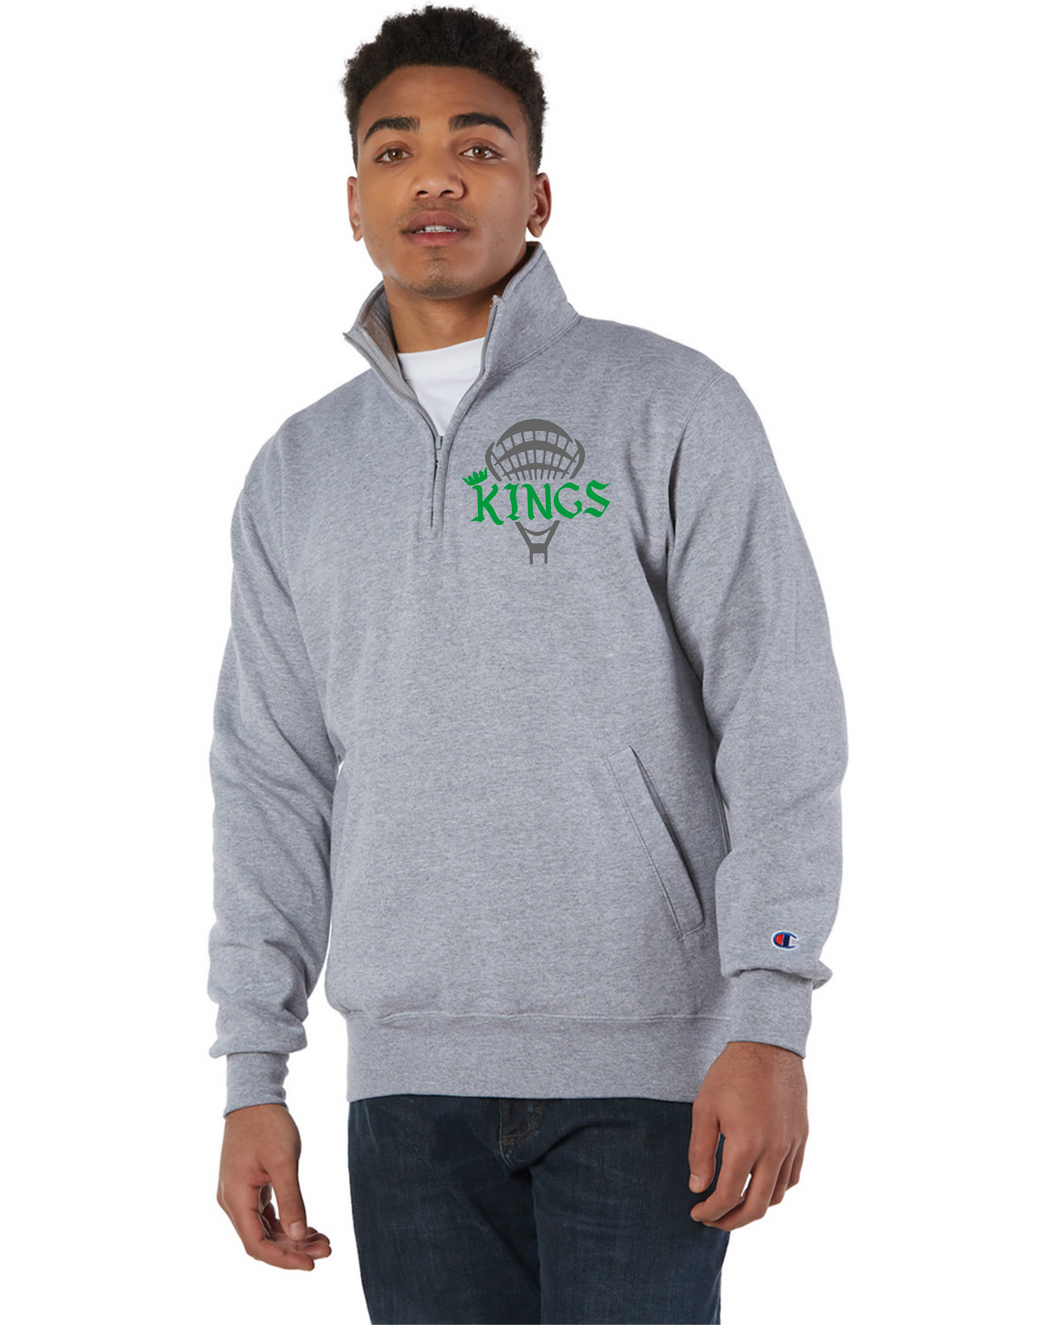 ATL-KINGS-306-6 - Champion Adult Double Dry Eco® Quarter-Zip Pullover - Kings with Split Stick Logo